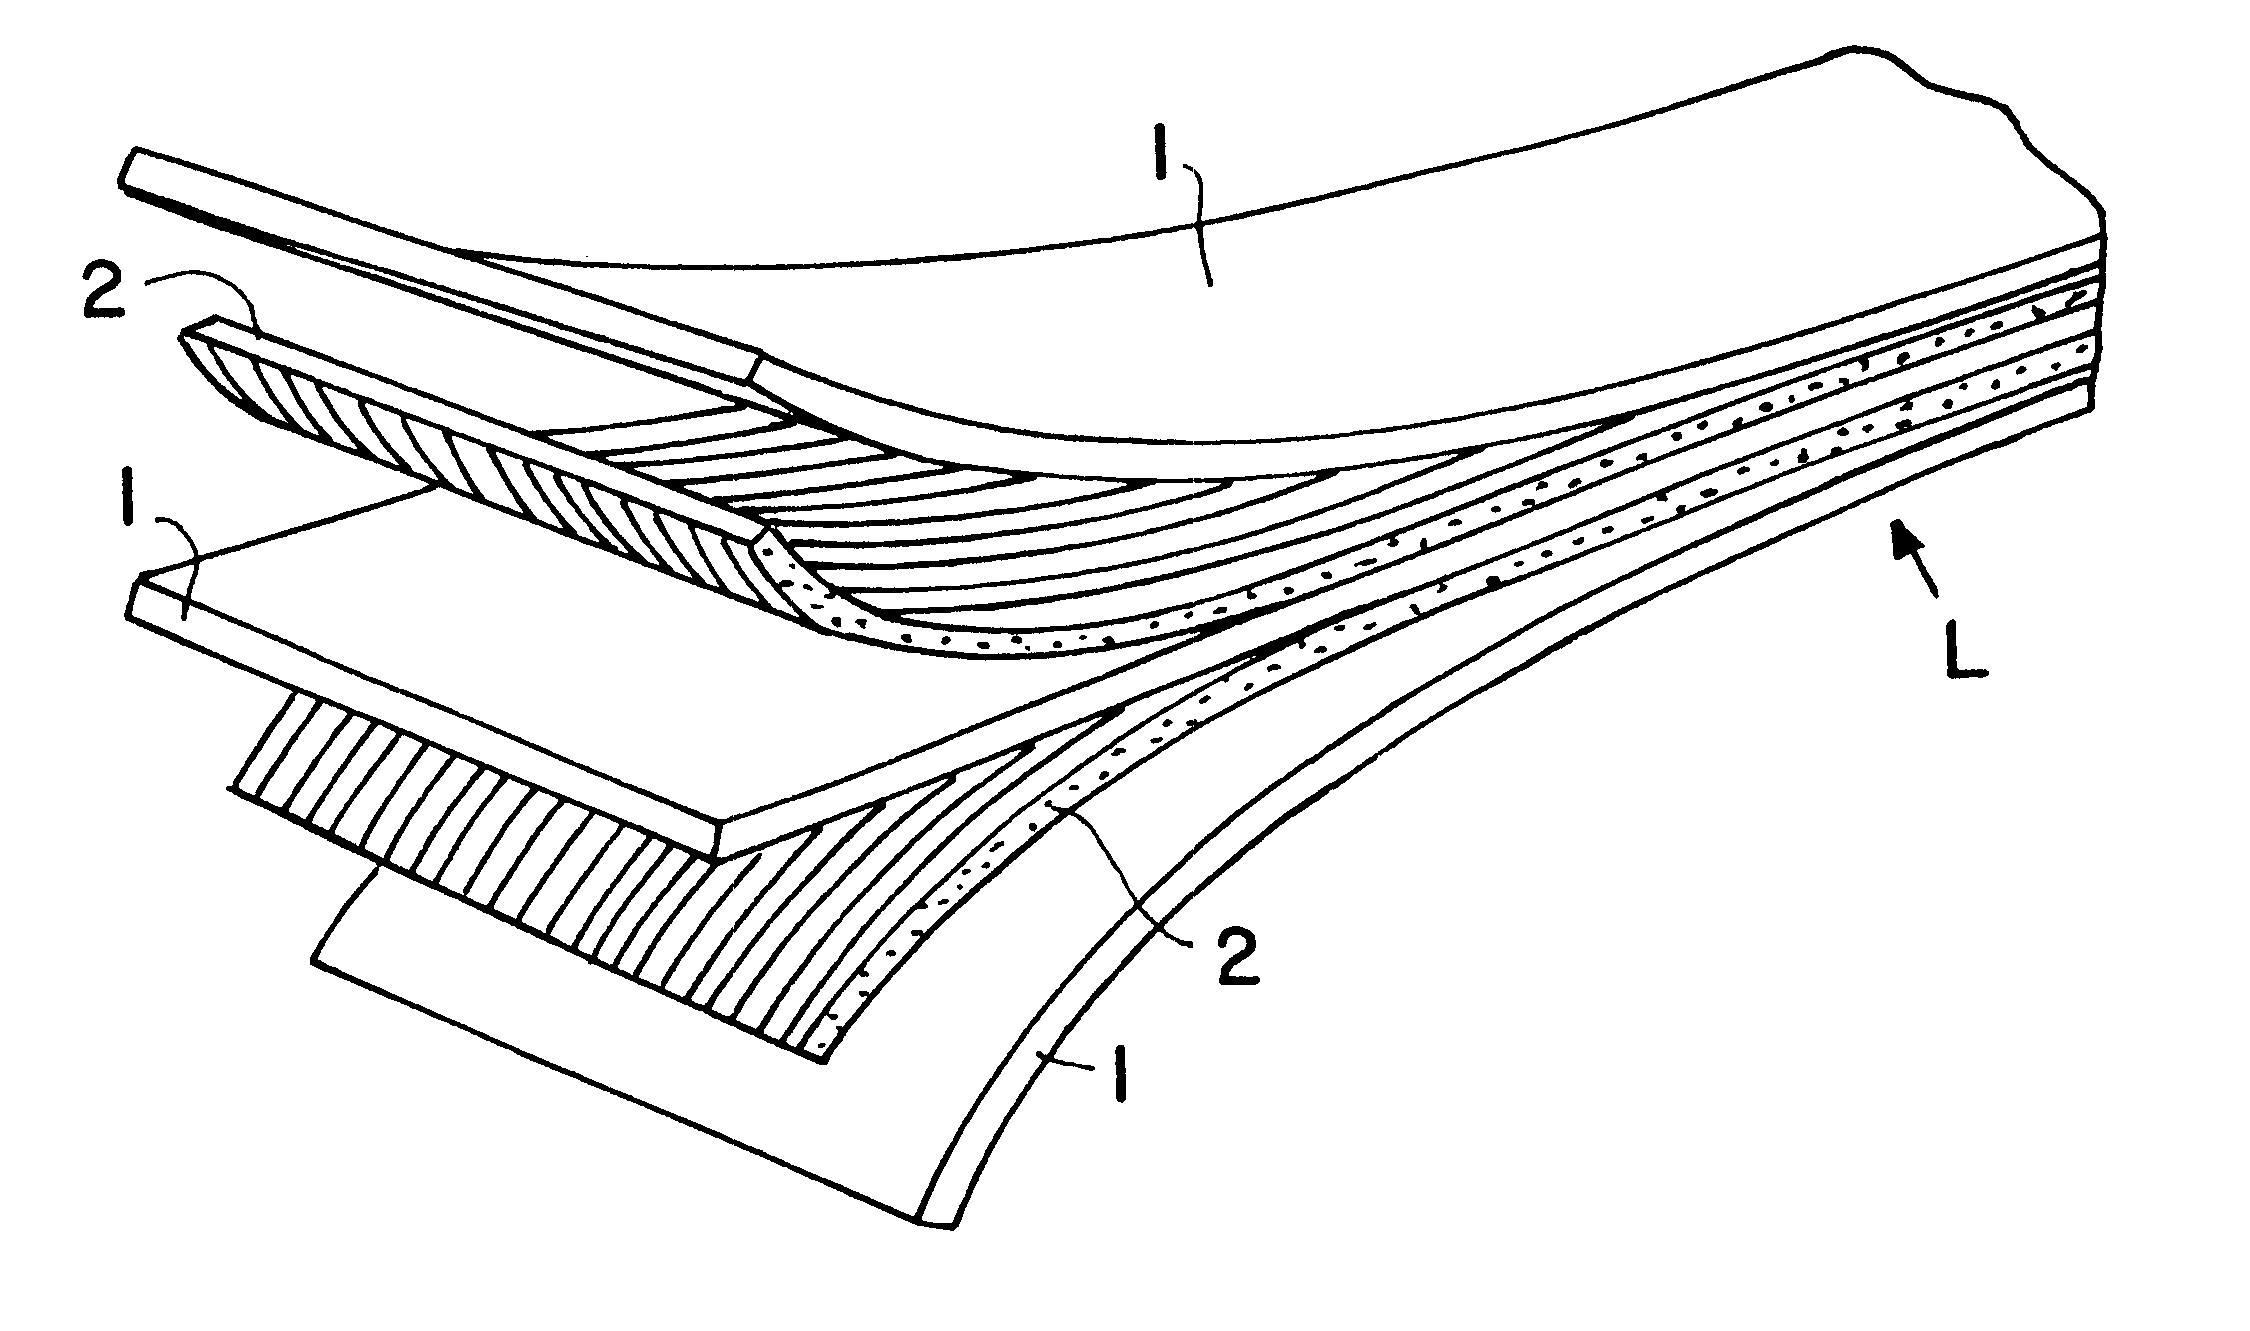 Method of manufacturing a profile member of a hybrid composite material